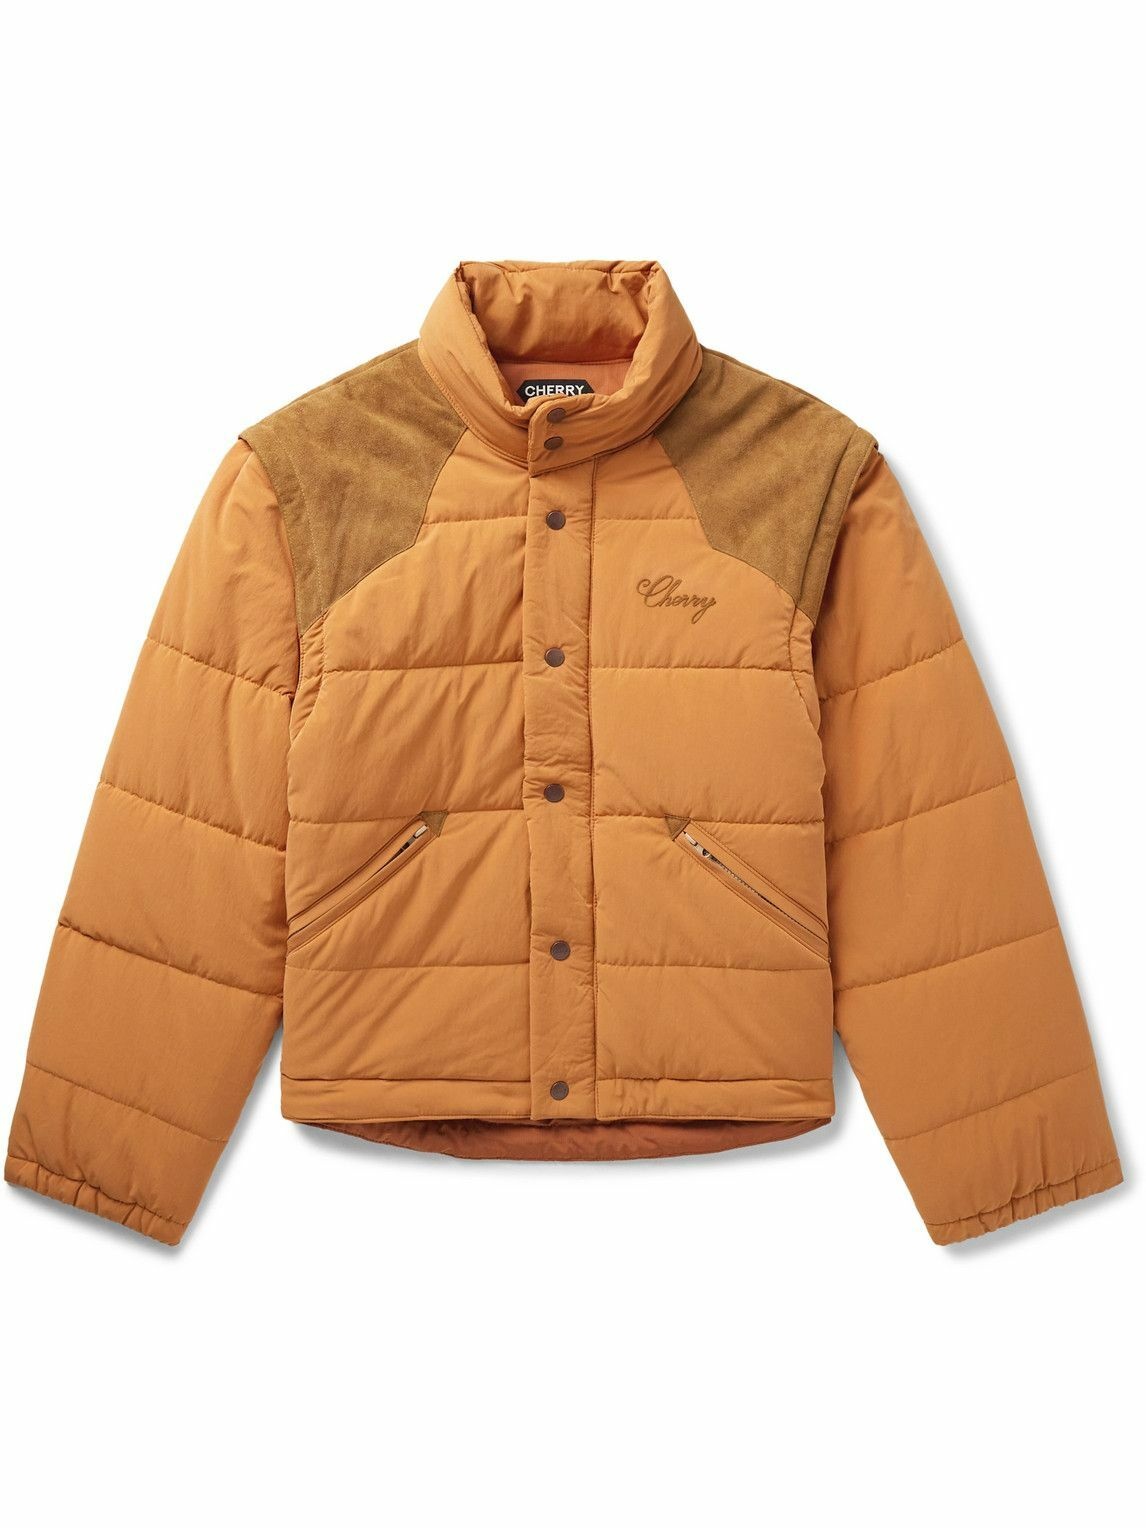 Photo: Cherry Los Angeles - Convertible Suede-Trimmed Logo-Embroidered Quilted Nylon Jacket - Orange